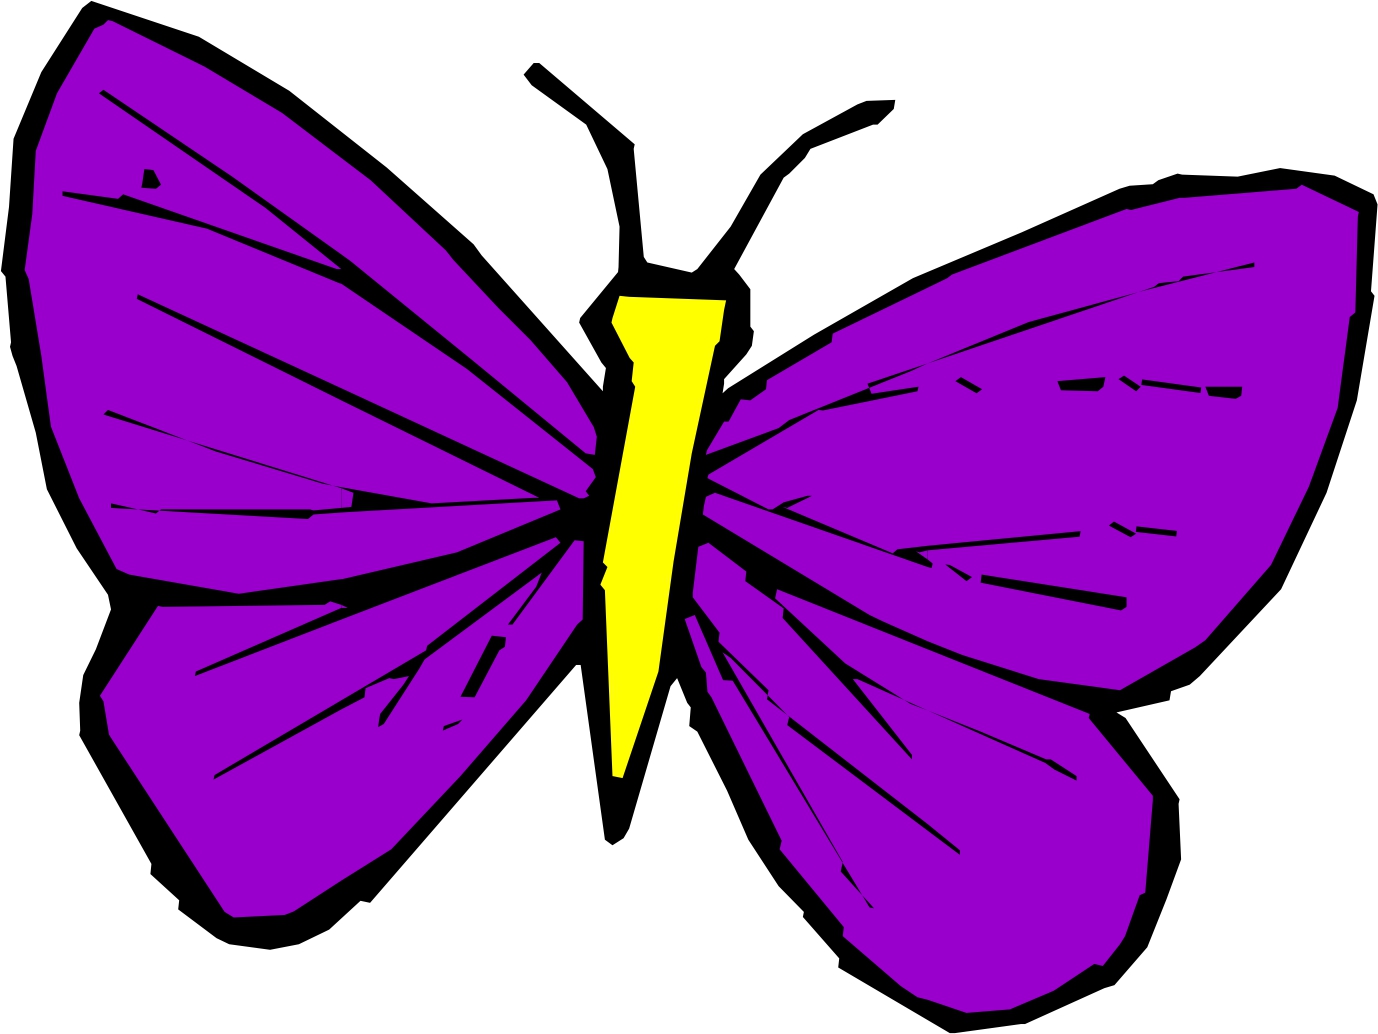 Picture Of A Cartoon Butterfly - ClipArt Best